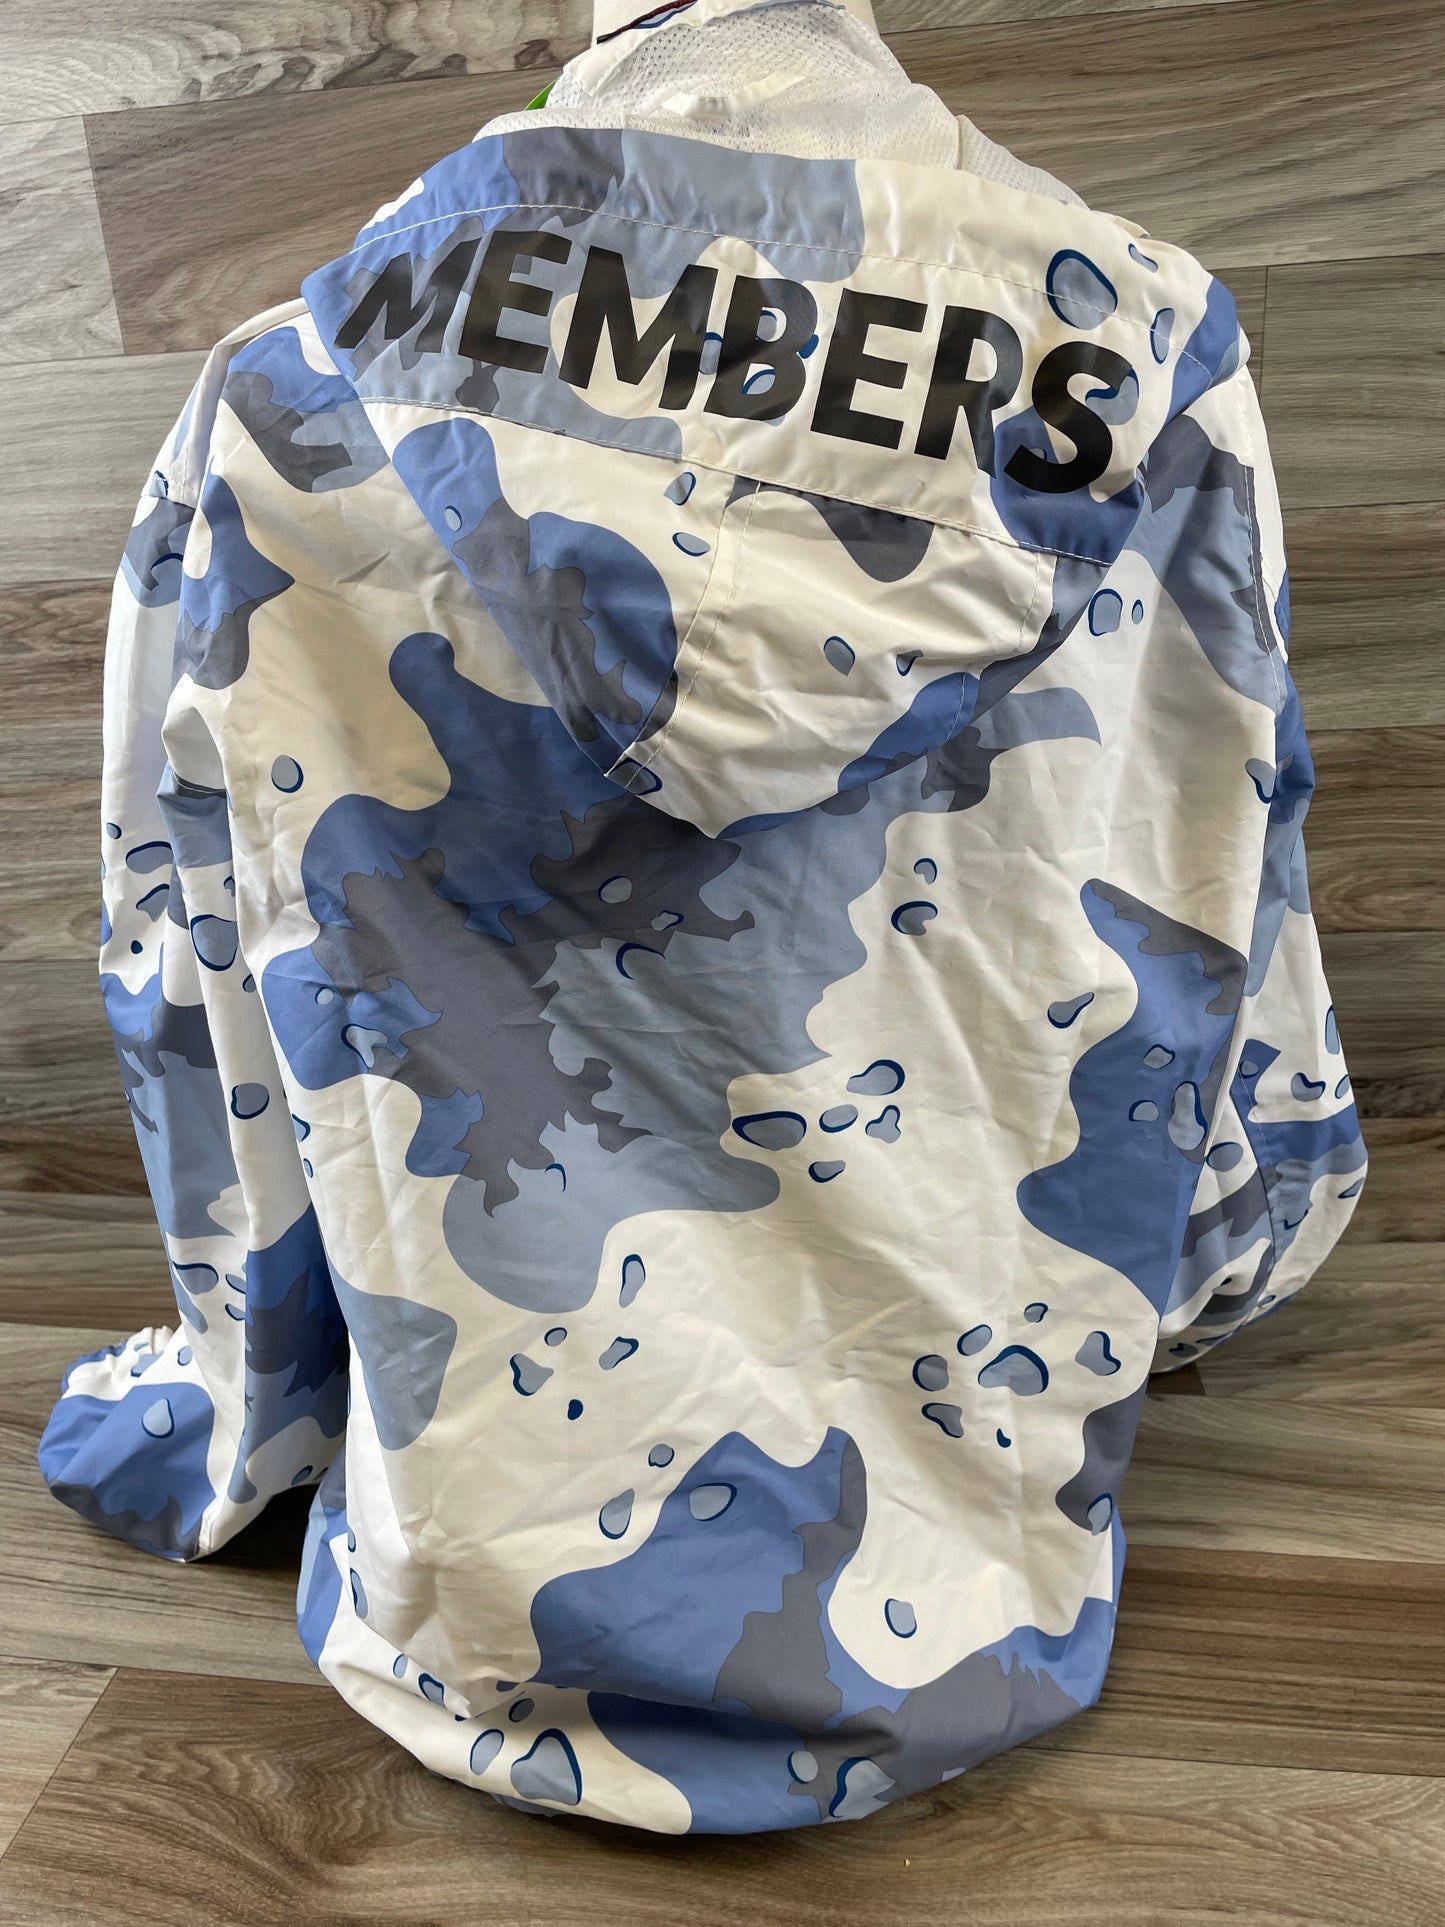 Jacket Windbreaker By Clothes Mentor  Size: M